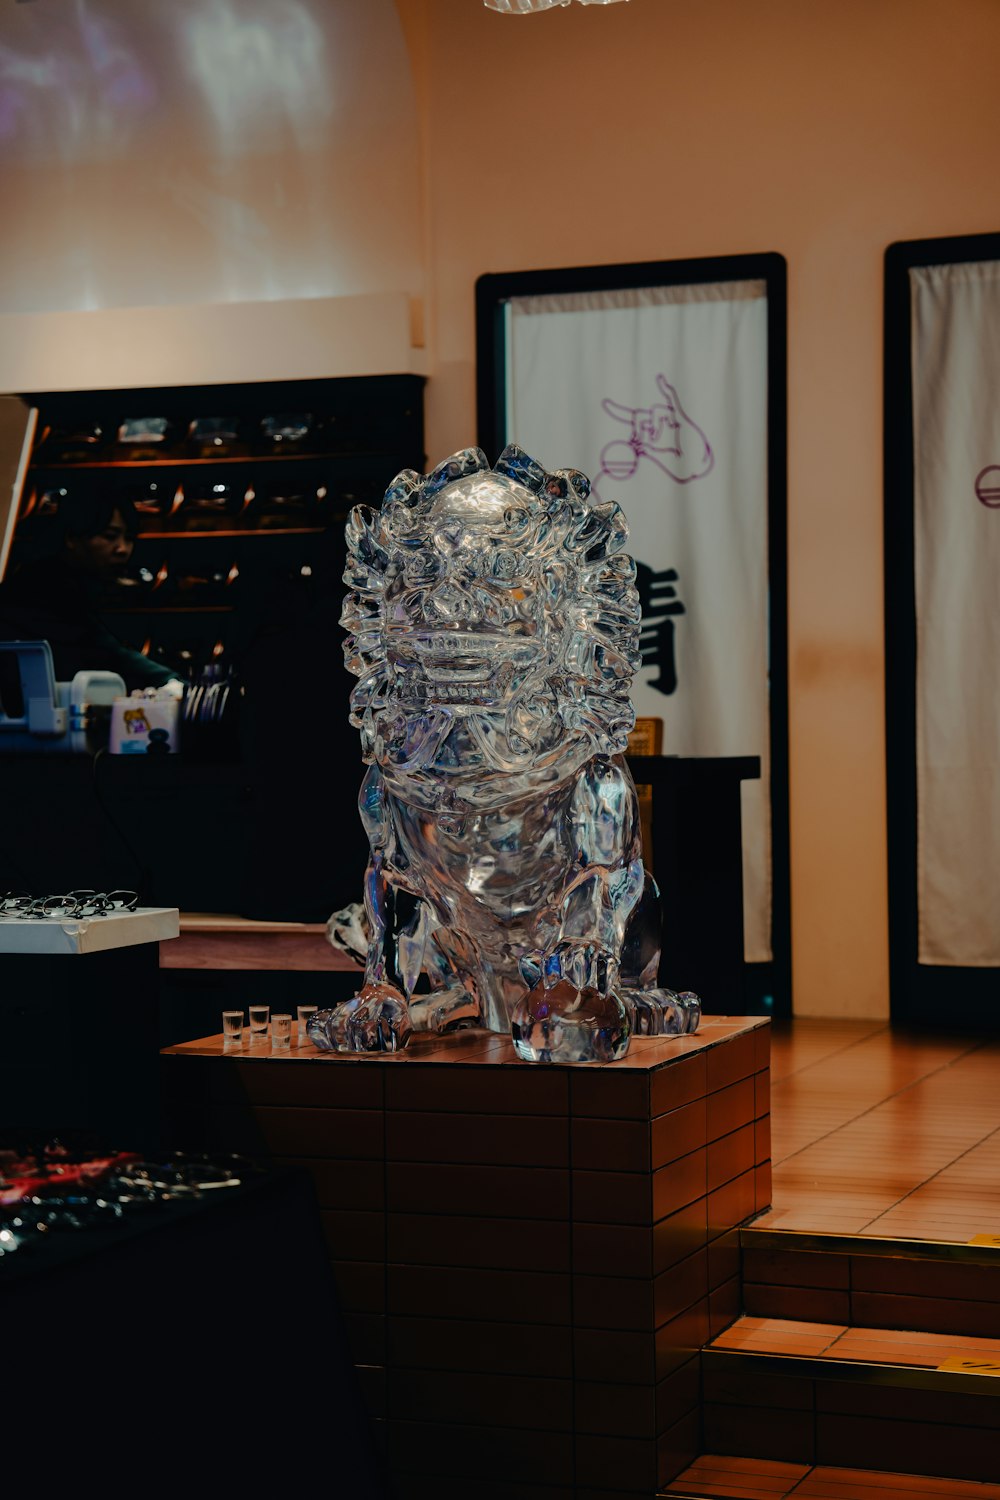 a glass sculpture sitting on top of a wooden block